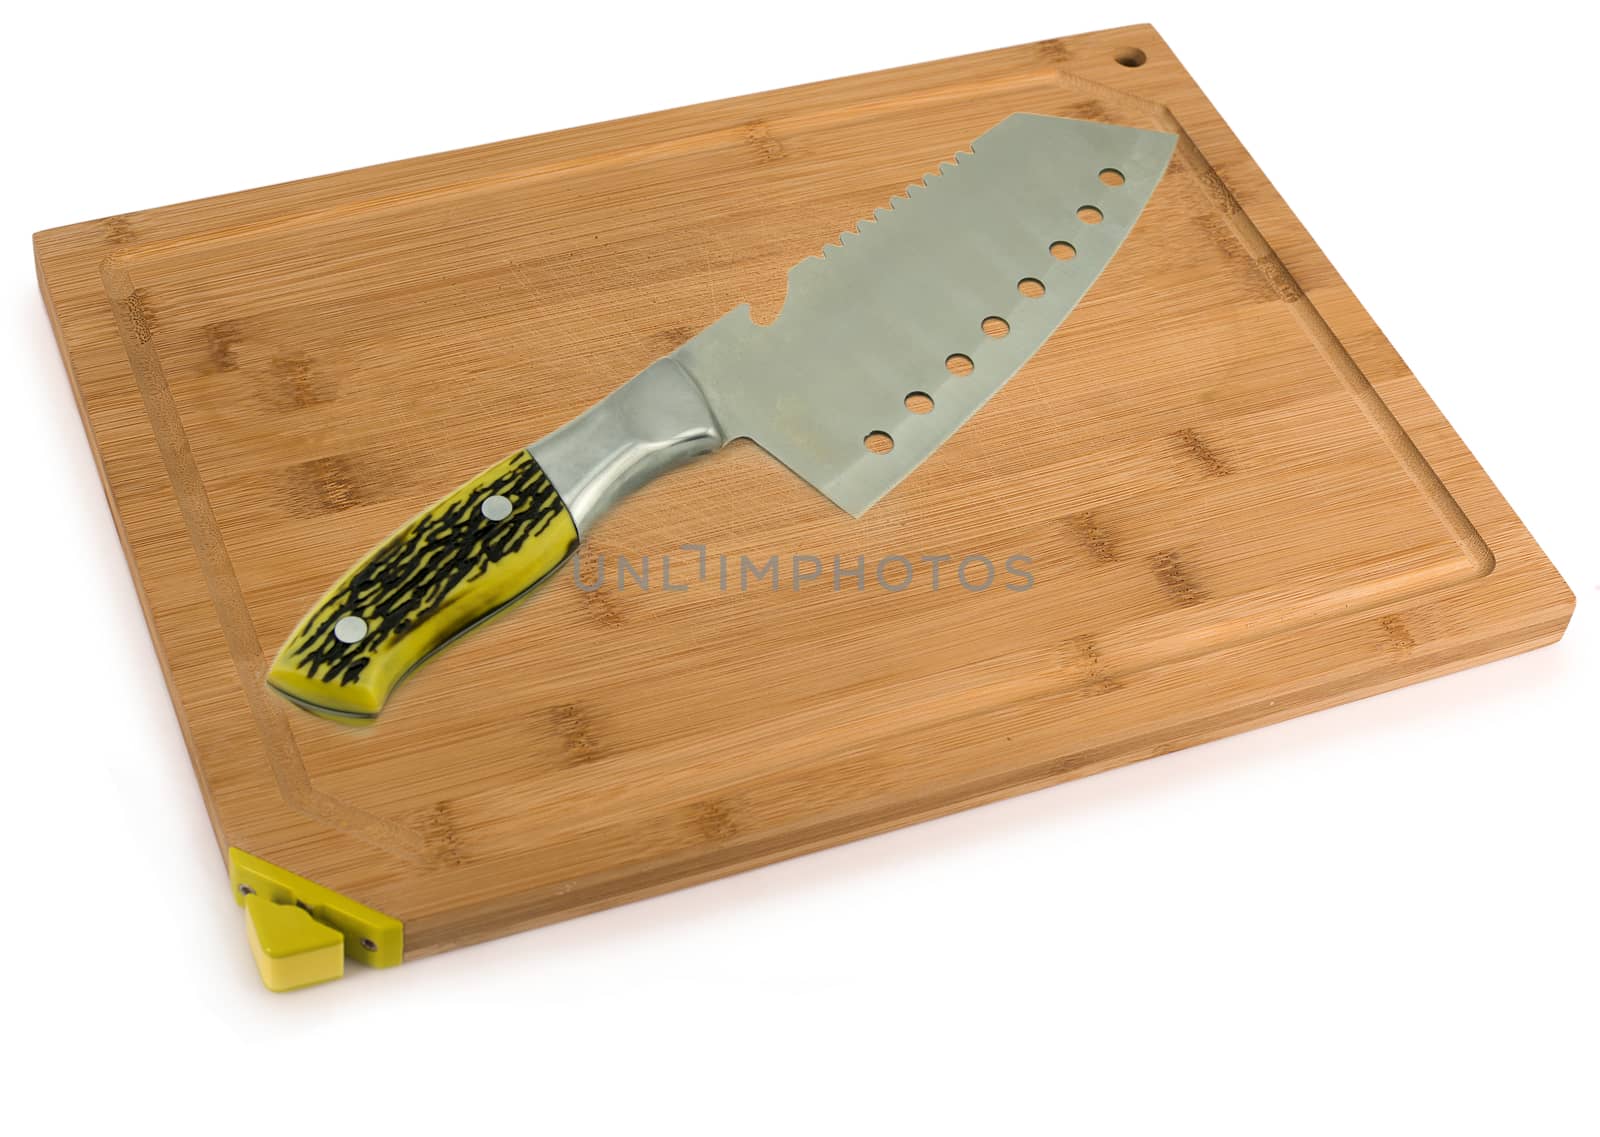 Cutting Board and Kitchen Knife close up. For your commercial and editorial use.